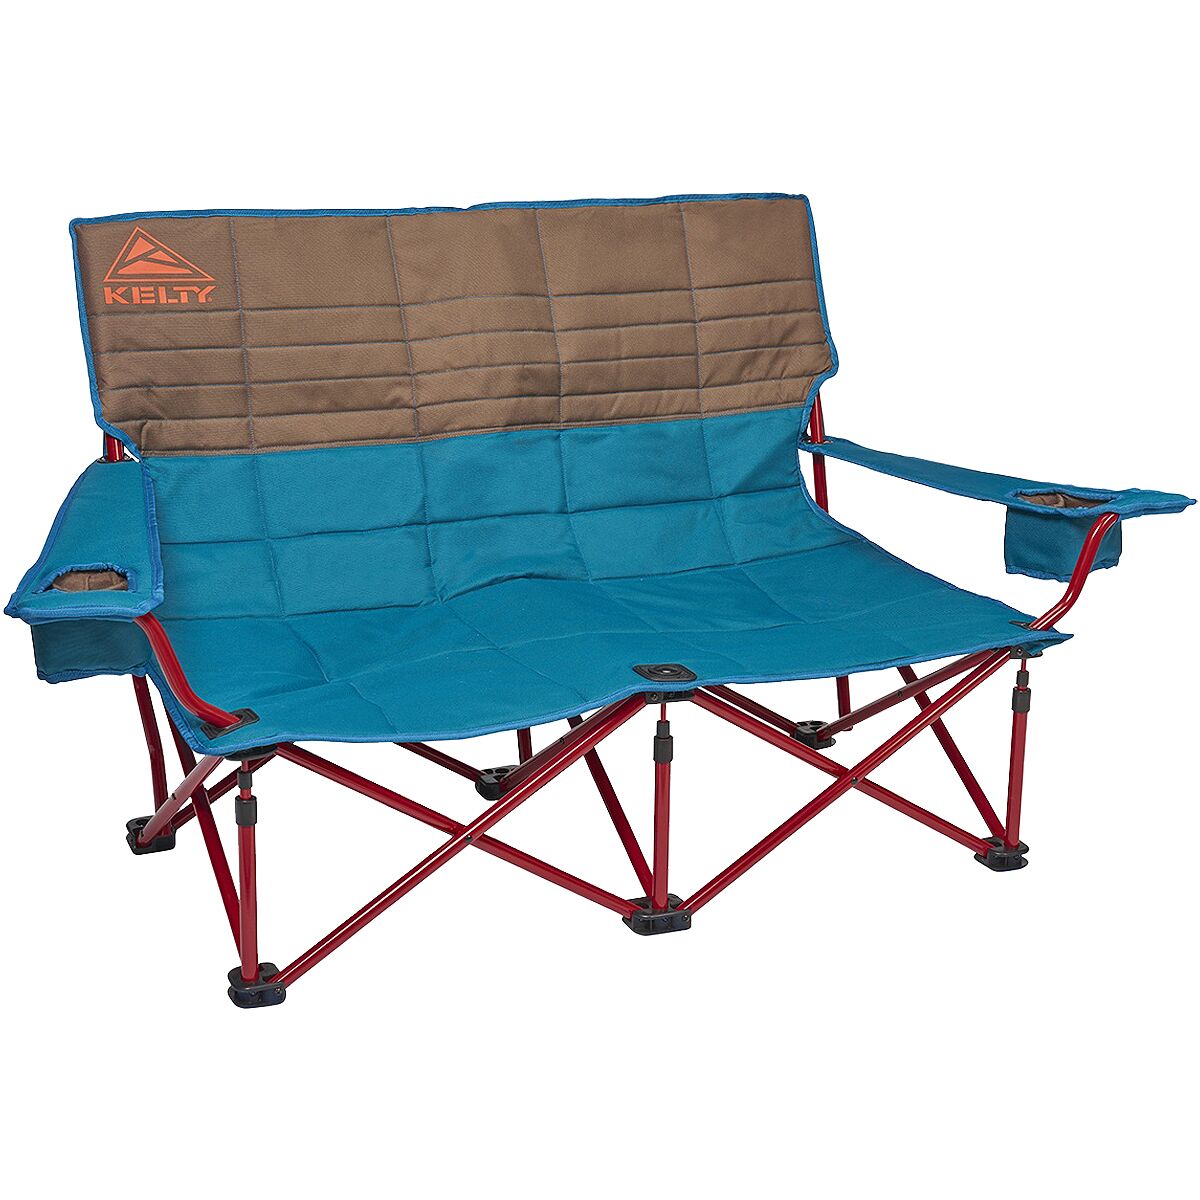 Kelty Low Loveseat Camp Chair